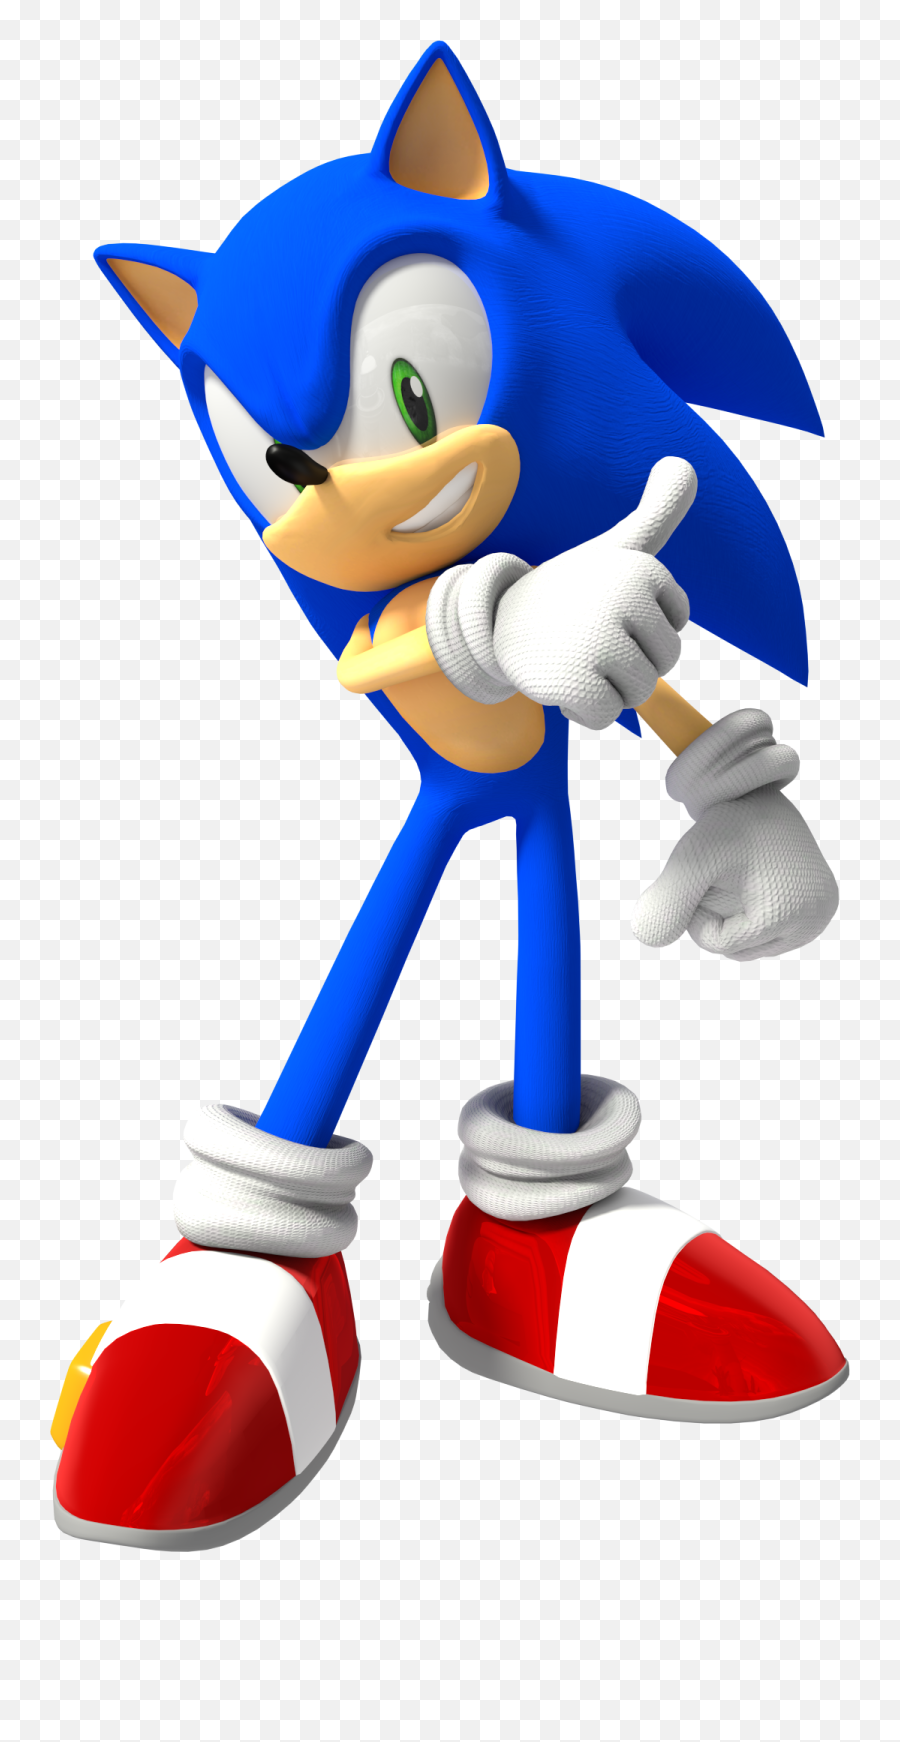 Download Free Png Pluspngcom Sonic The Hedge - Dlpngcom Sonic The Hedgehog Hd,Hedge Png